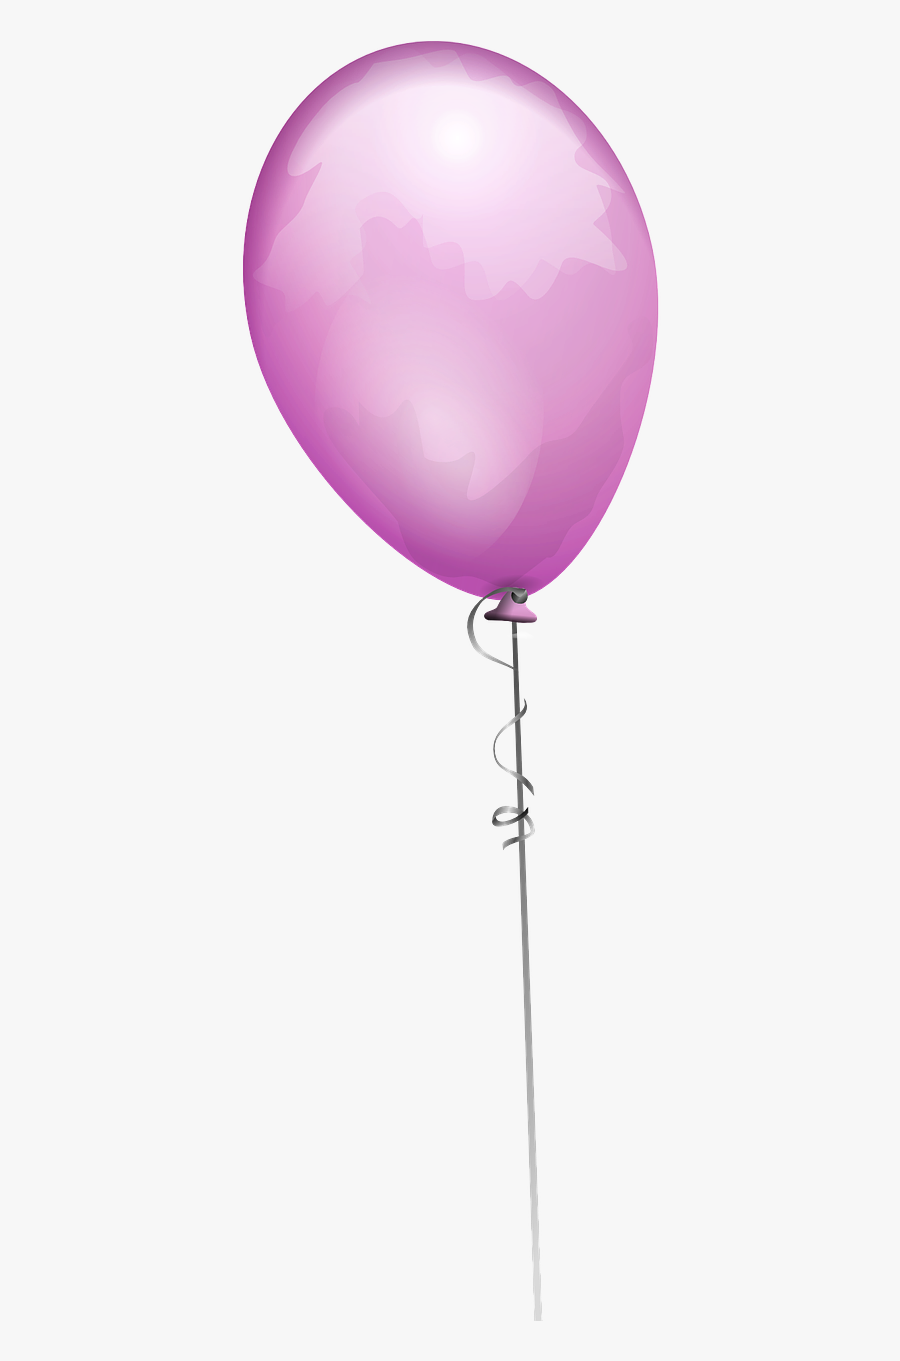 Balloon Purple String Floating Png Image - Balloon, Transparent Clipart